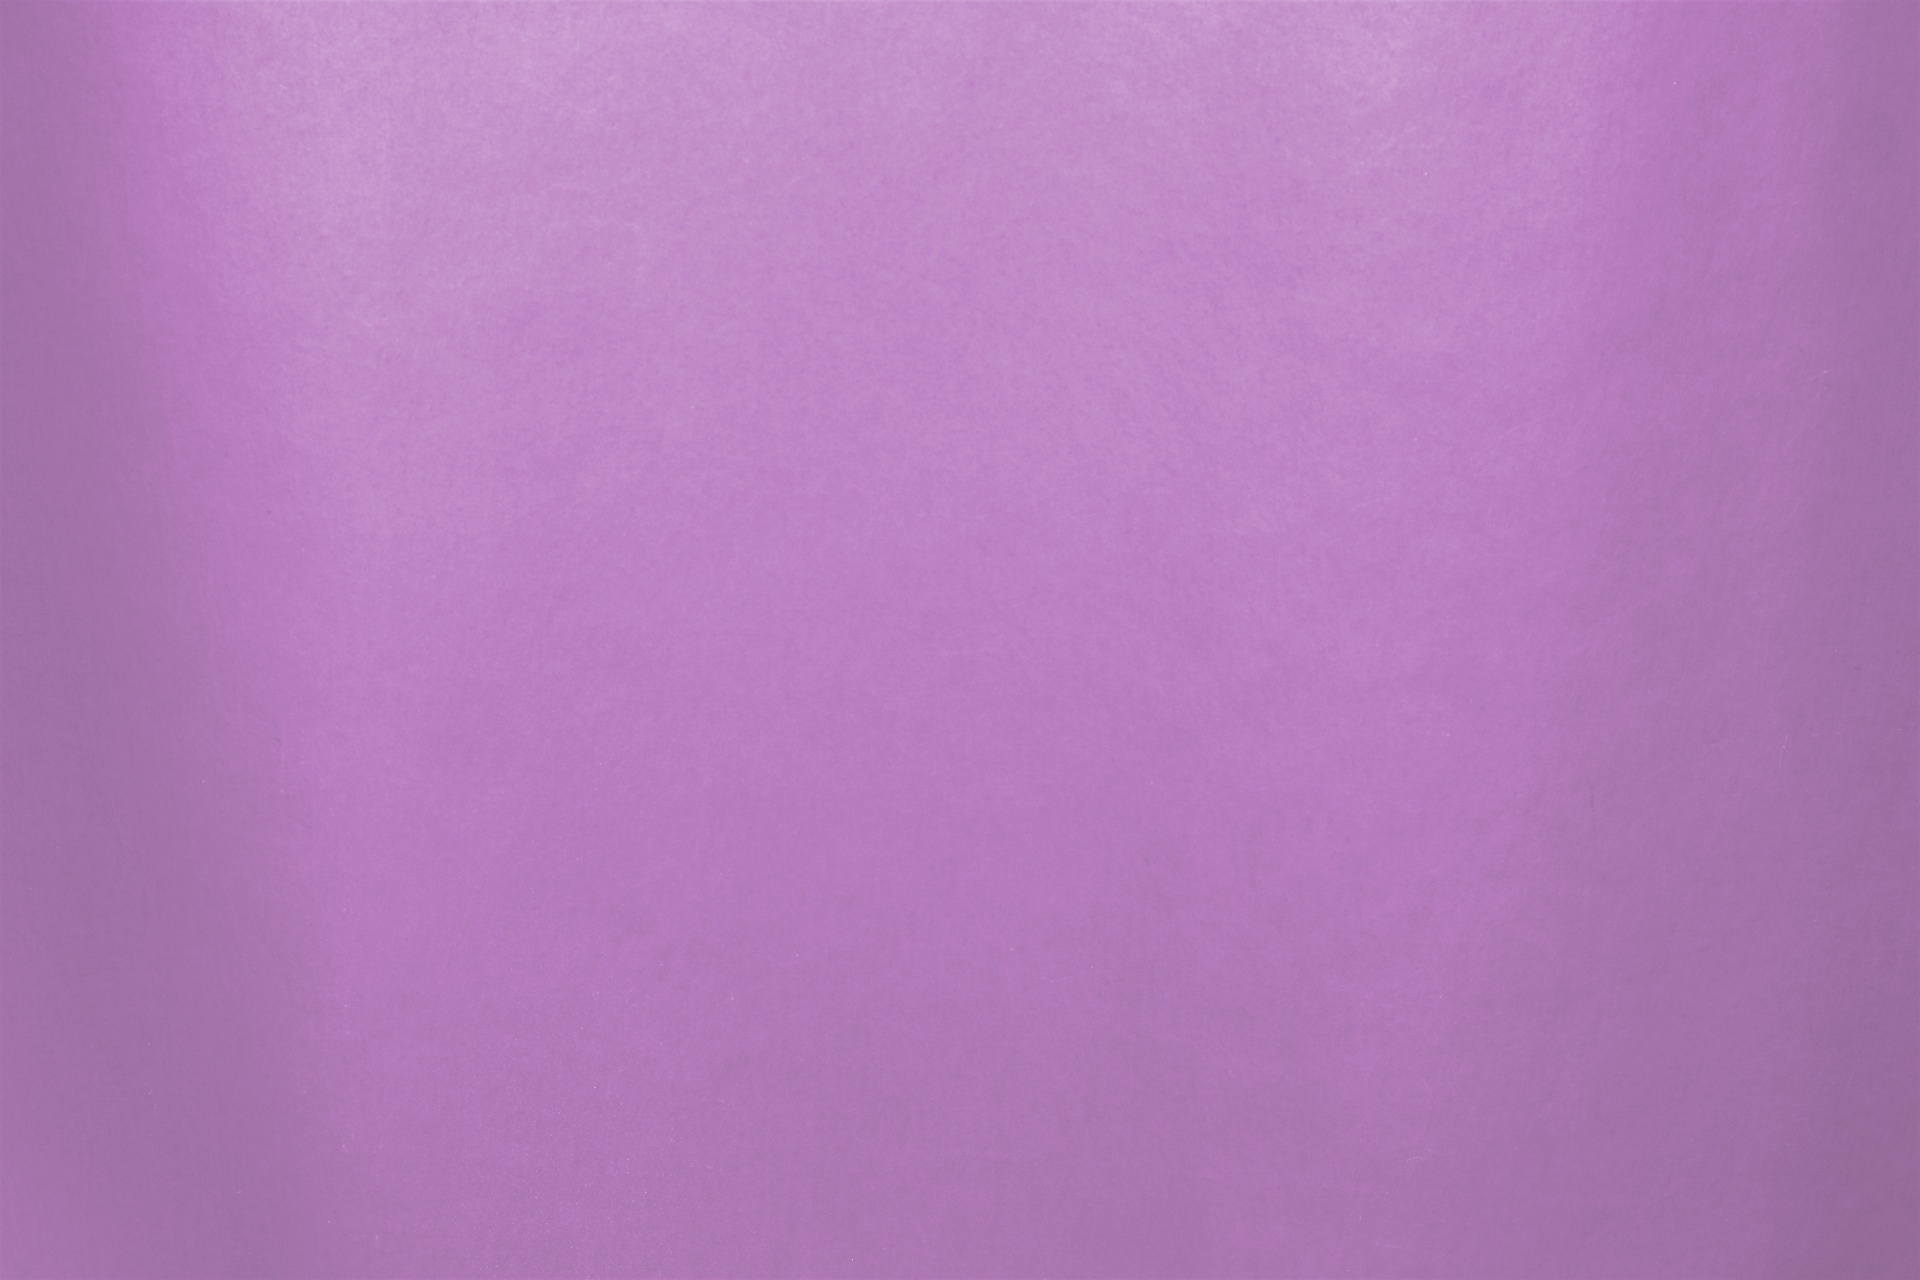 Pastel Purple Smooth Background Free Stock Photo - Public Domain Pictures